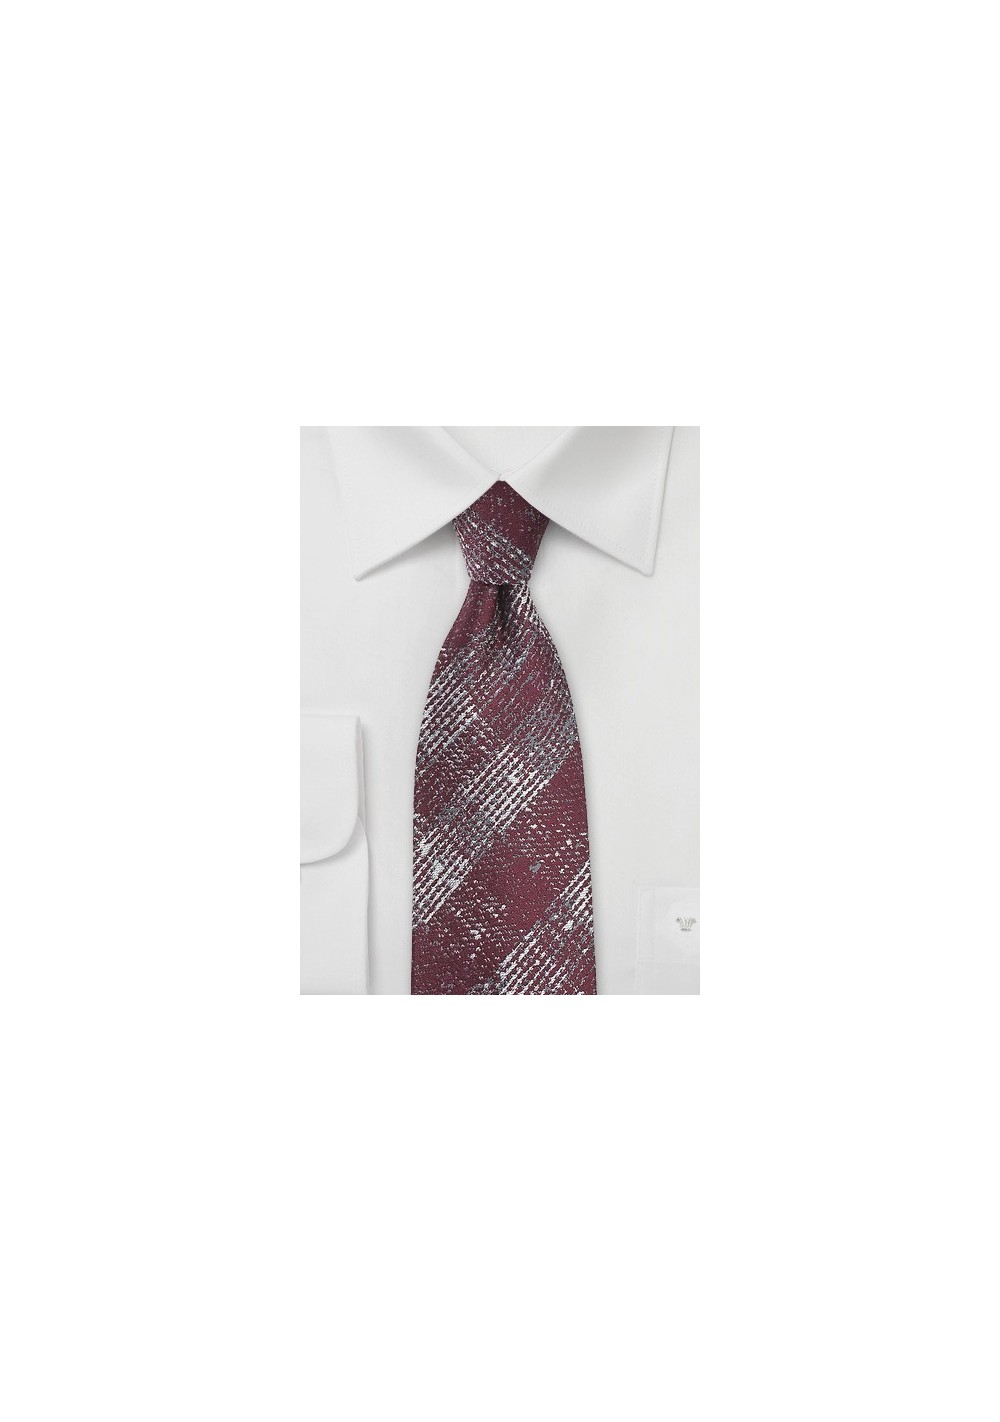 Textured Plaid Tie in Cabernet Red